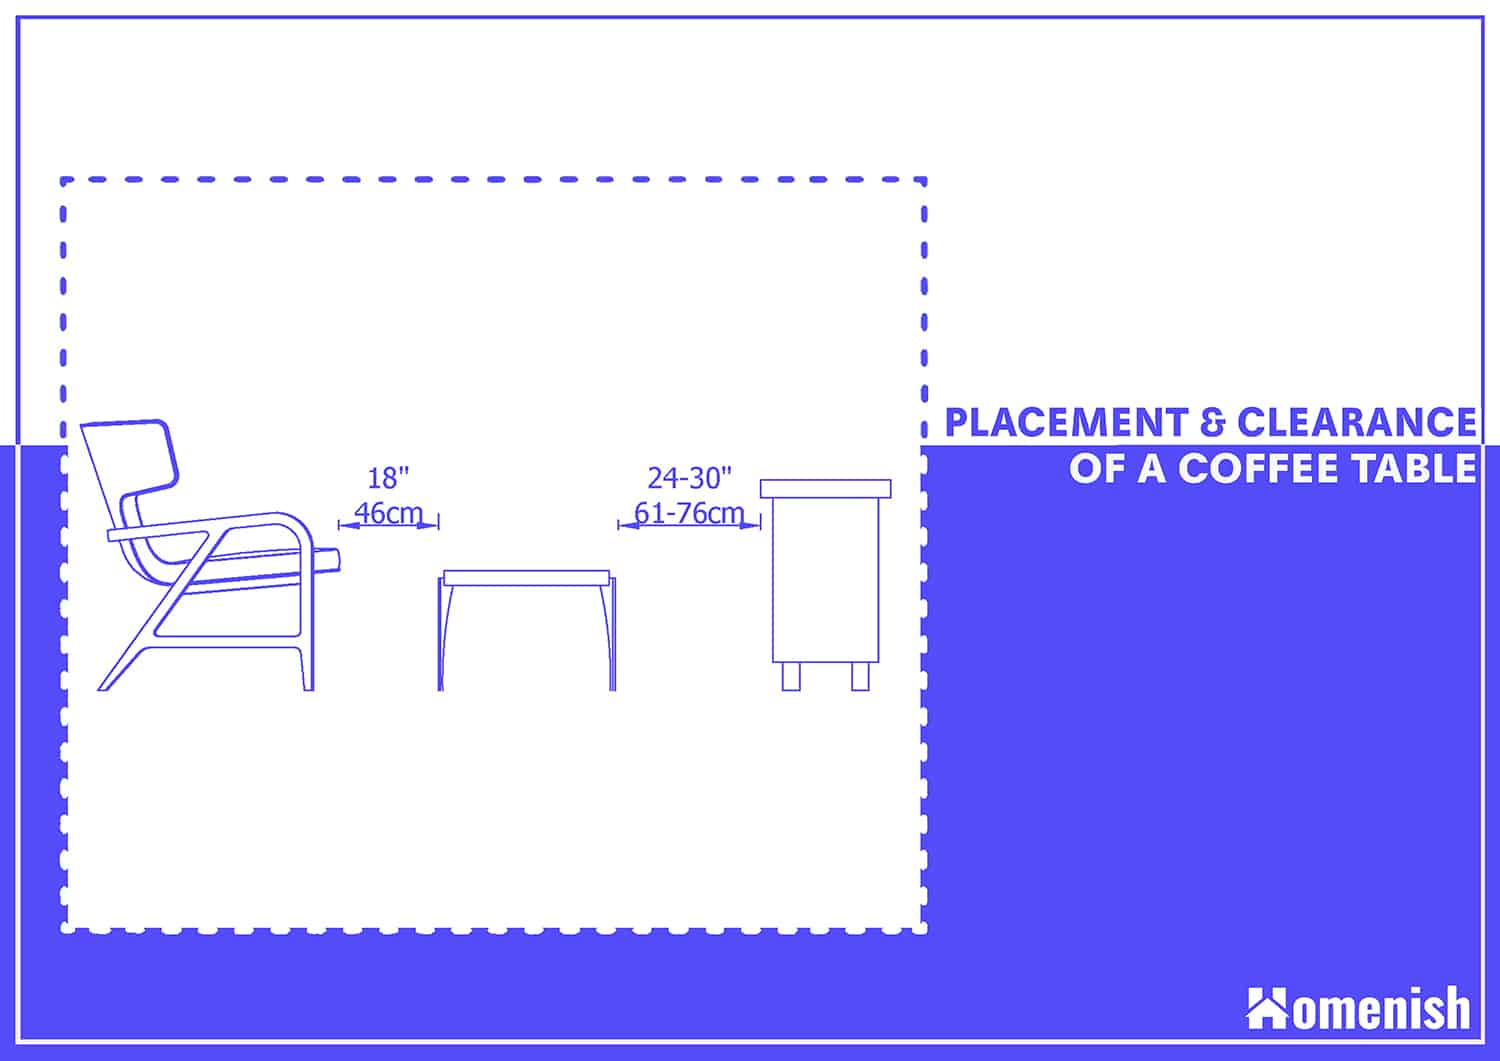 Placement & Clearance of a Coffee Table